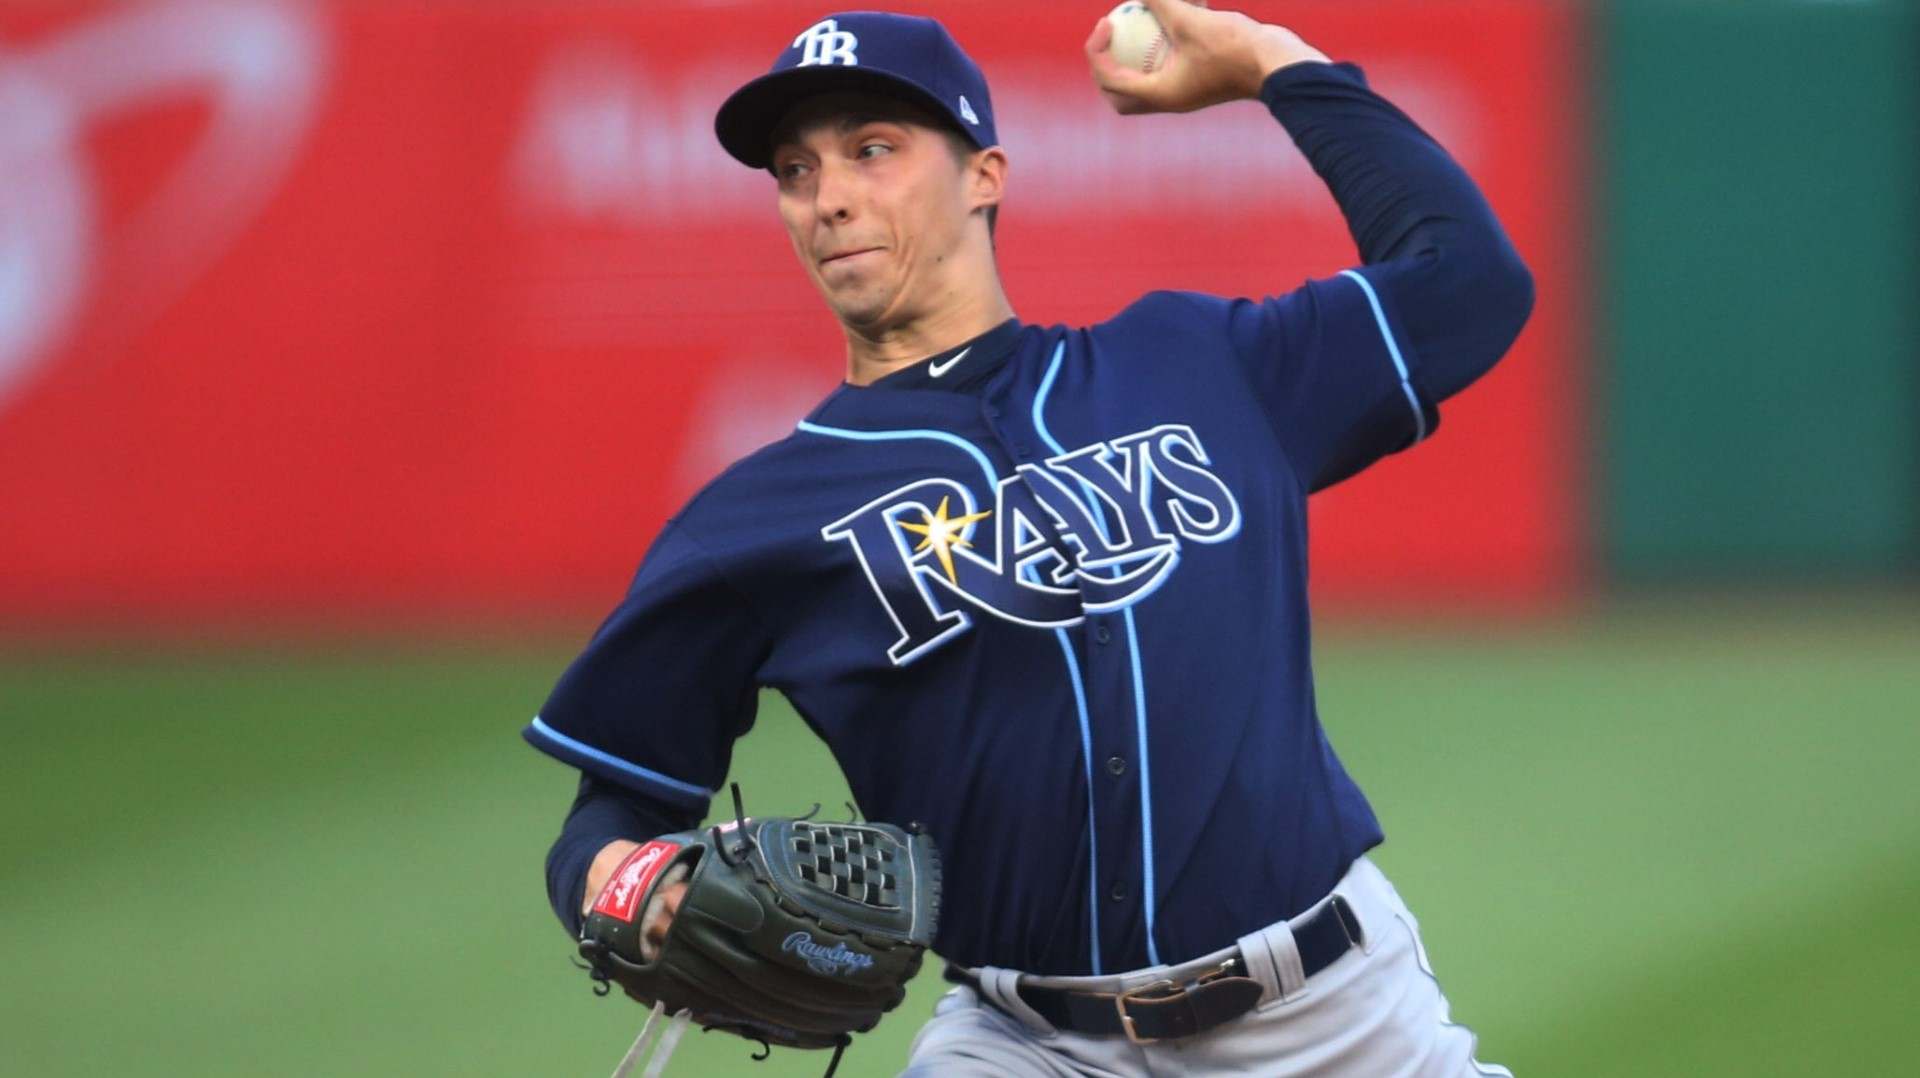 Why pitching is now 'personal' for Rays lefty Blake Snell